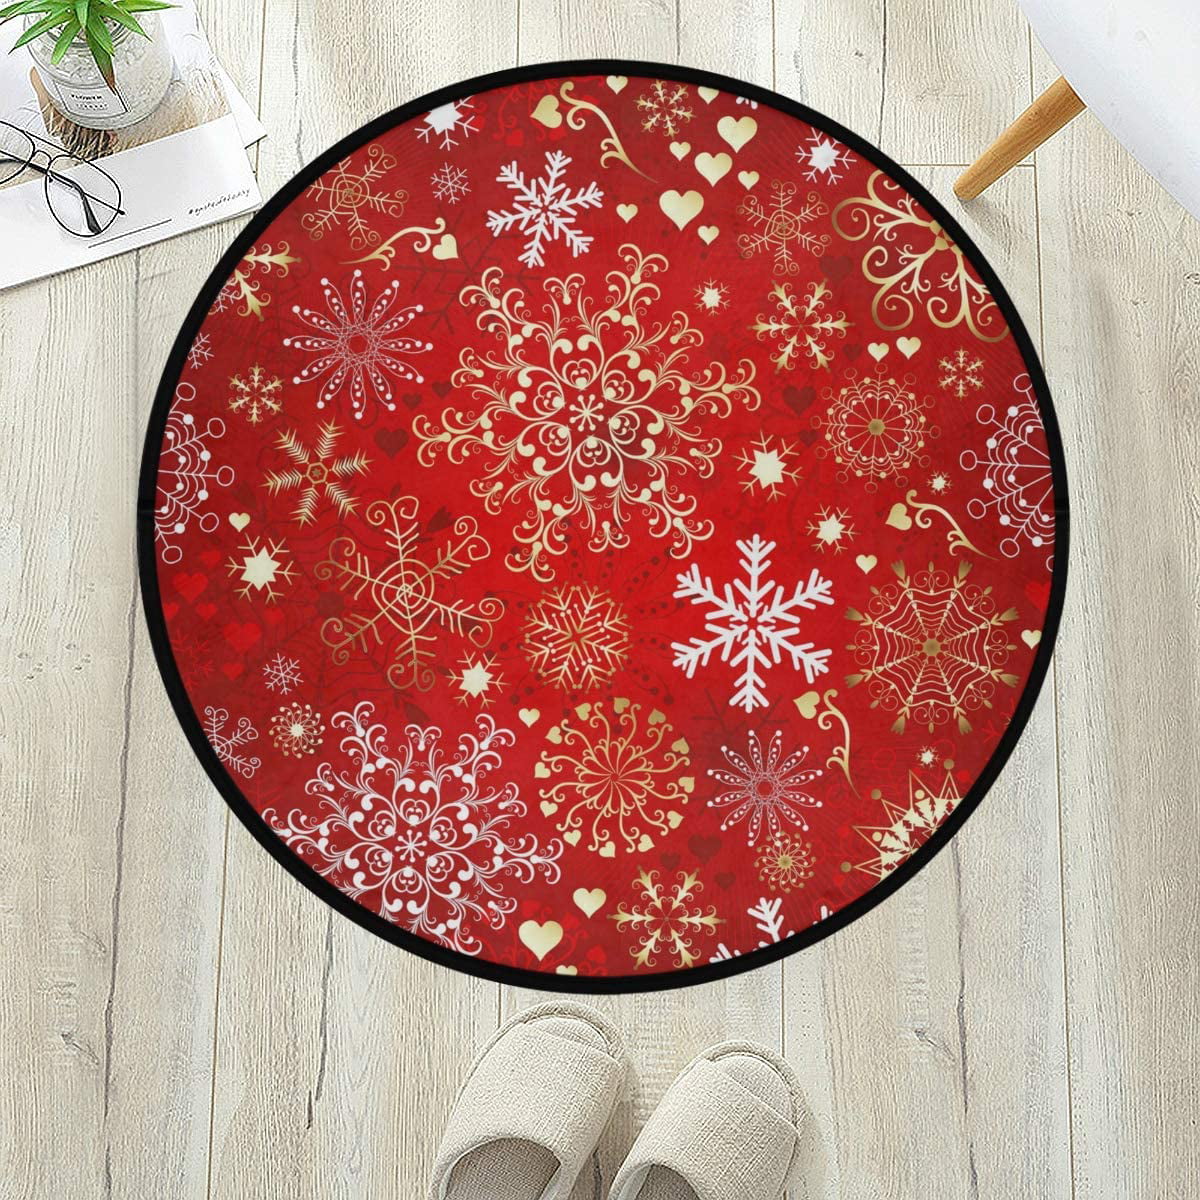 Round Rug Flower Poppy Daisy Non-Slip Circular Area Rugs Computer Chair Mat Comfortable Living Room Bedroom Area Rug,Washable Durable Play Mat 36.2 in 